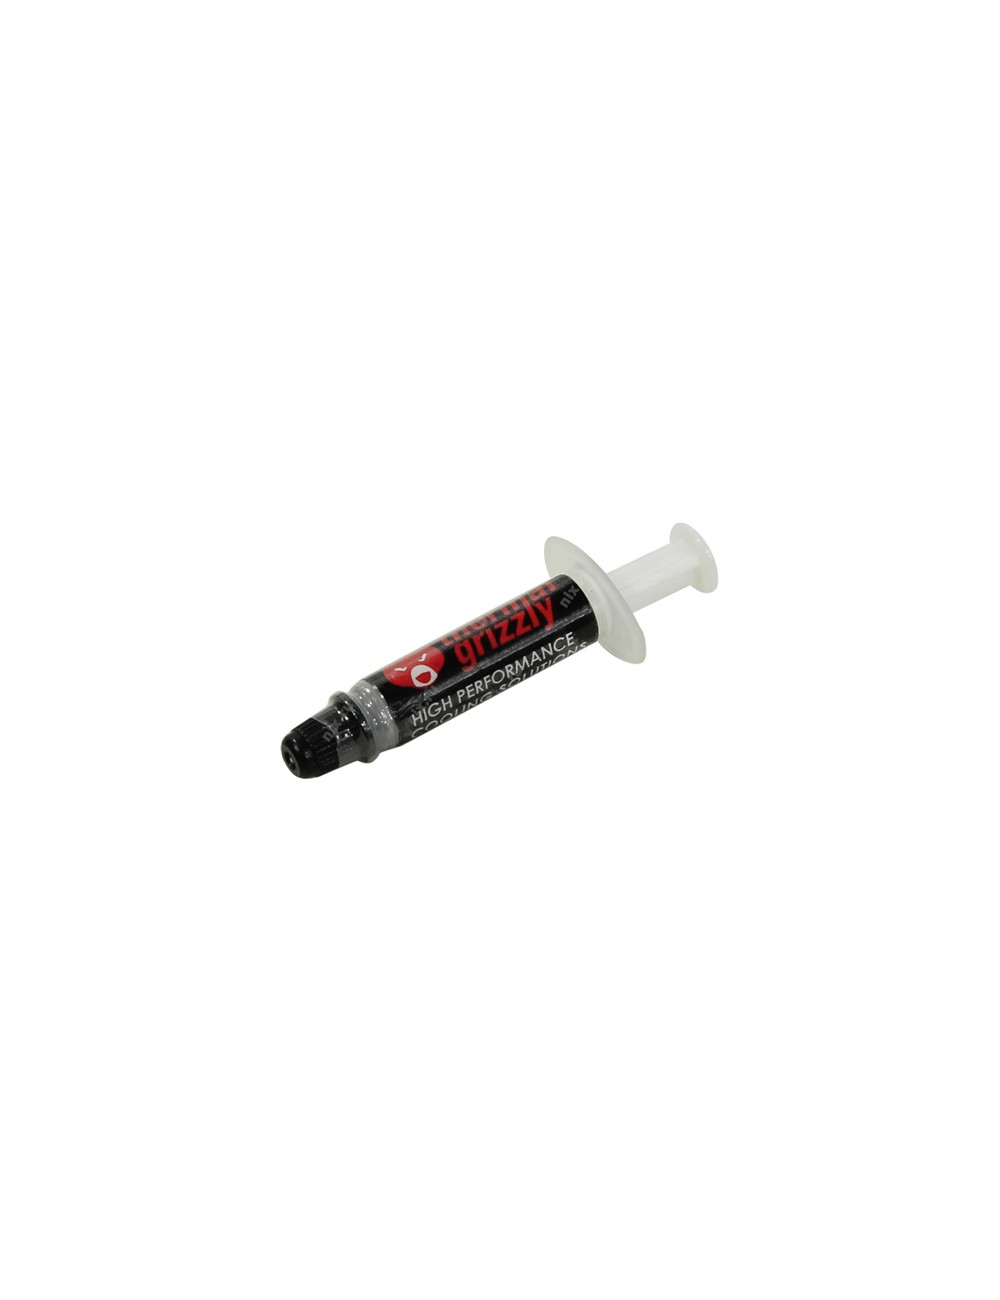 Thermal Grizzly Thermal grease "Kryonaut" 1g universal, Thermal Conductivity: 12,5 W/mk * Thermal Resistance: 0,0032 K/W * Elect